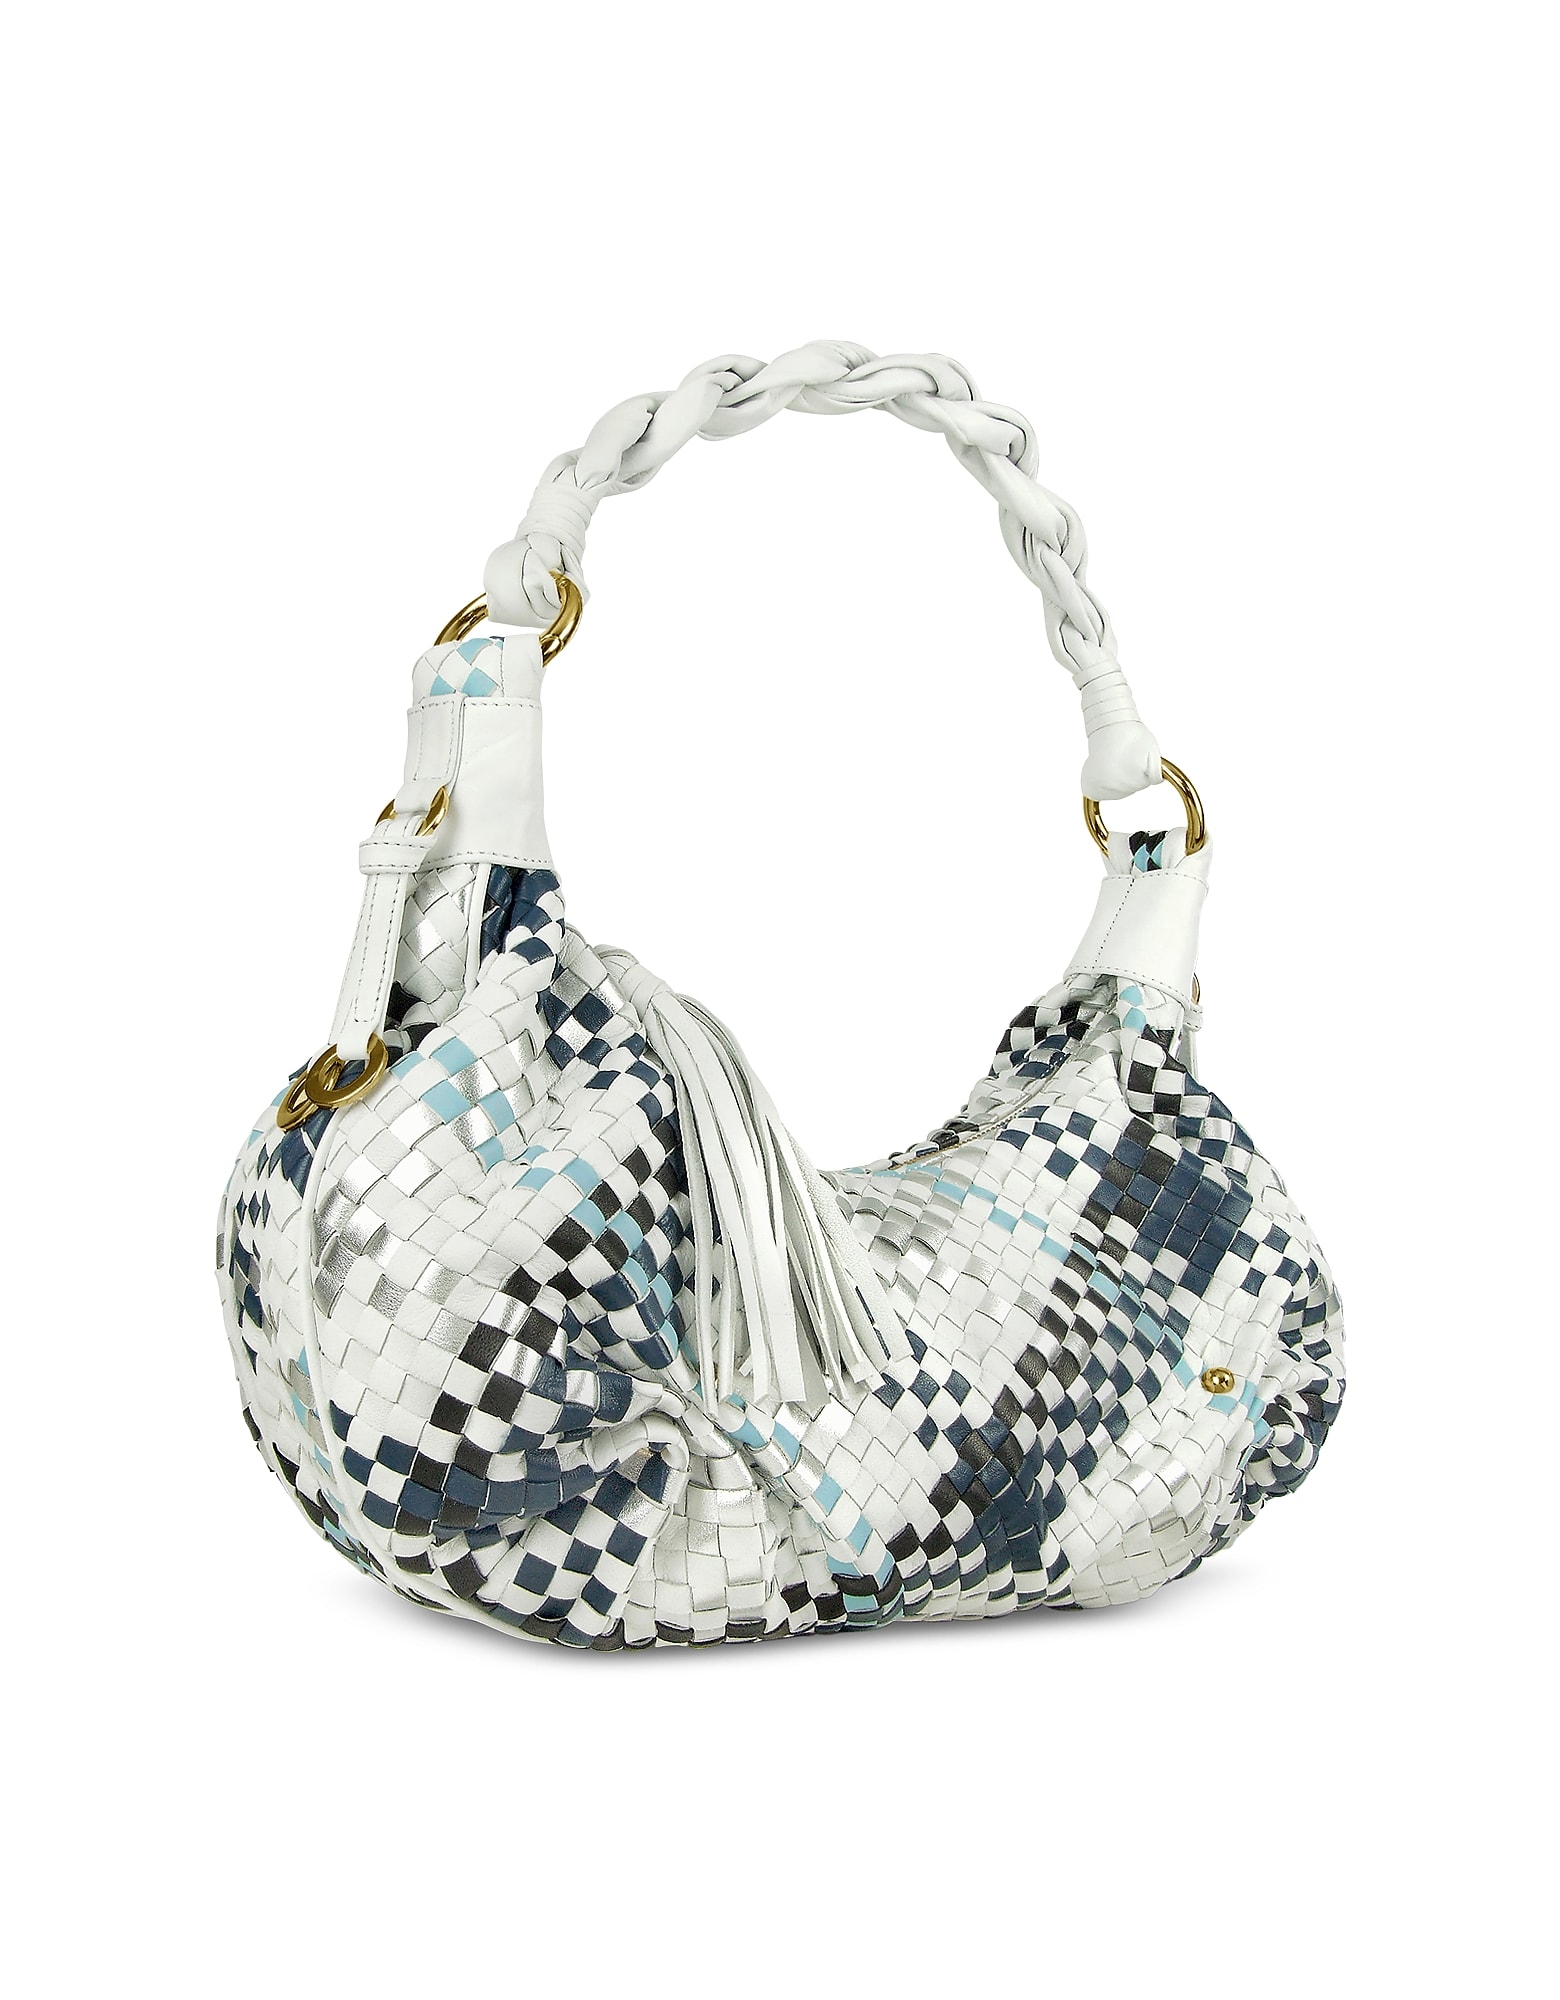 FONTANELLI BLUE & WHITE WOVEN LEATHER EAST/WEST HOBO BAG,11258997